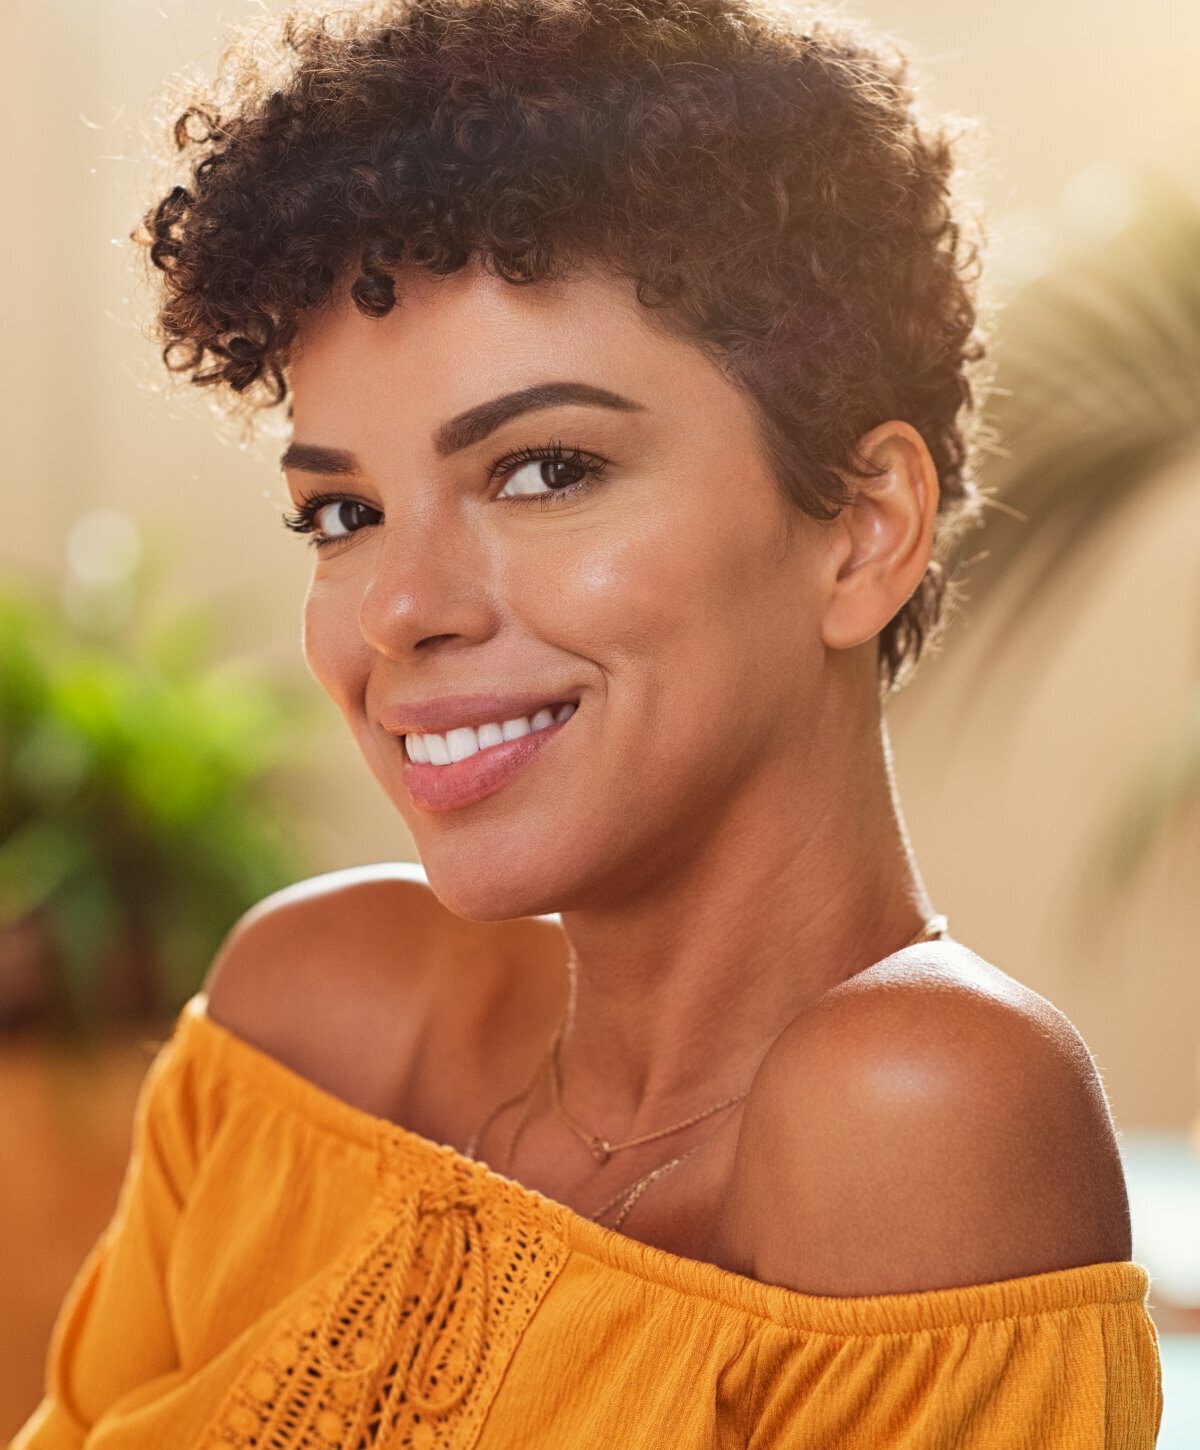 houston vitamin injection model smiling with short curly hair